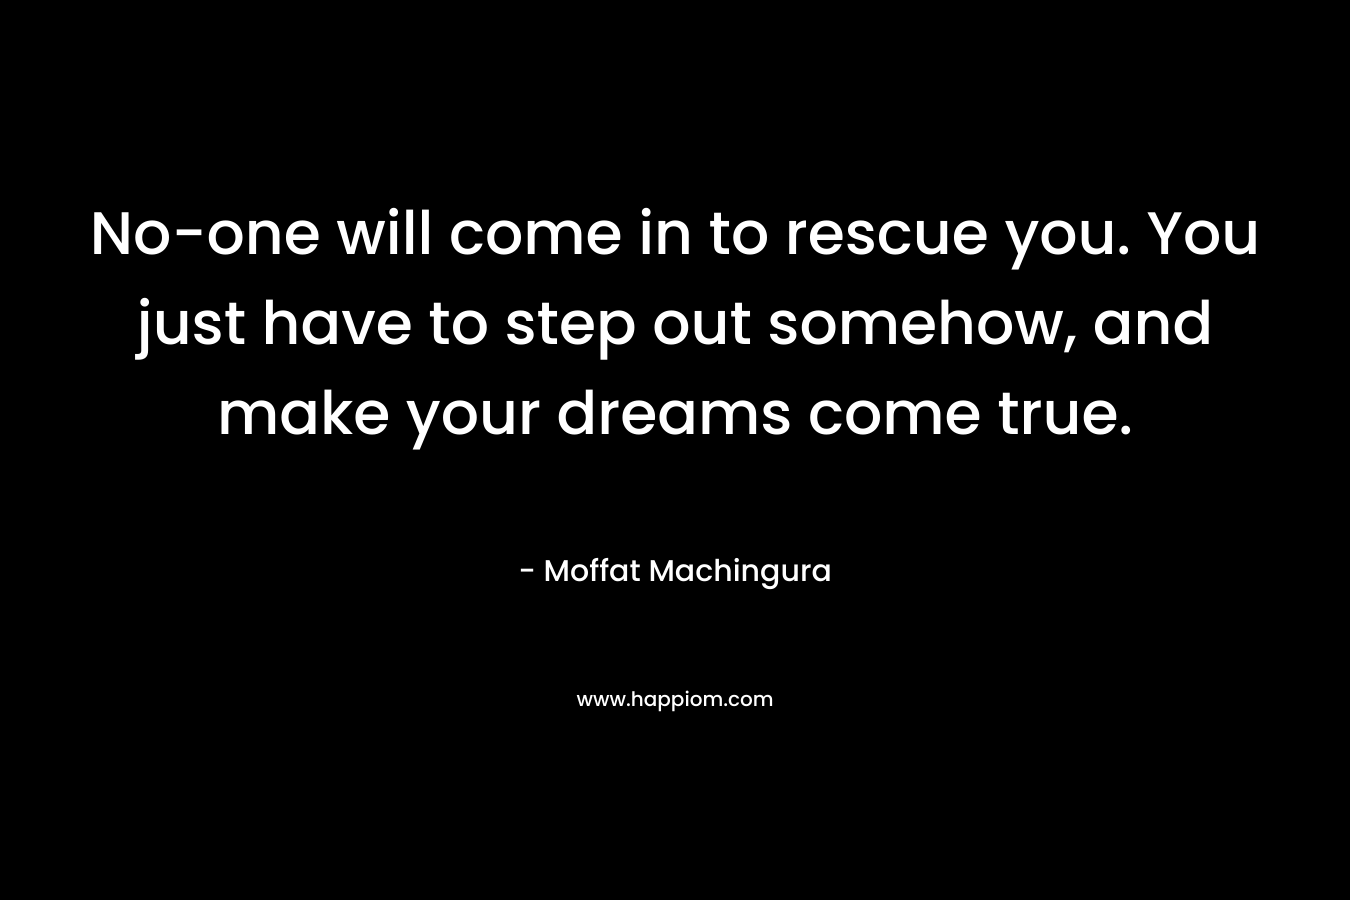 No-one will come in to rescue you. You just have to step out somehow, and make your dreams come true.